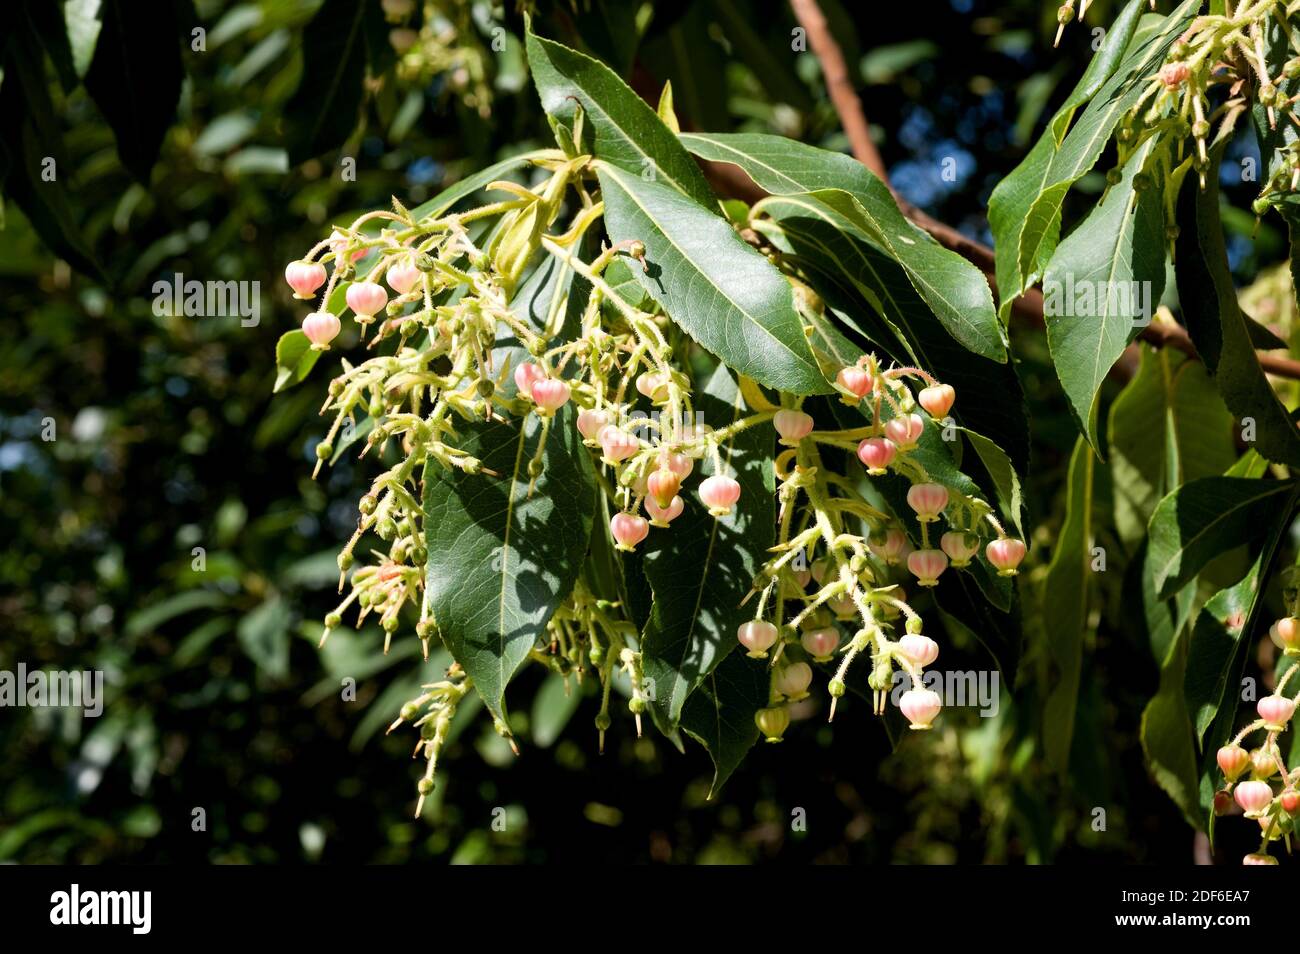 Madrono canario (Arbutus canariensis) is a shrub endemic of Canary islands. Flowers detail. Stock Photo